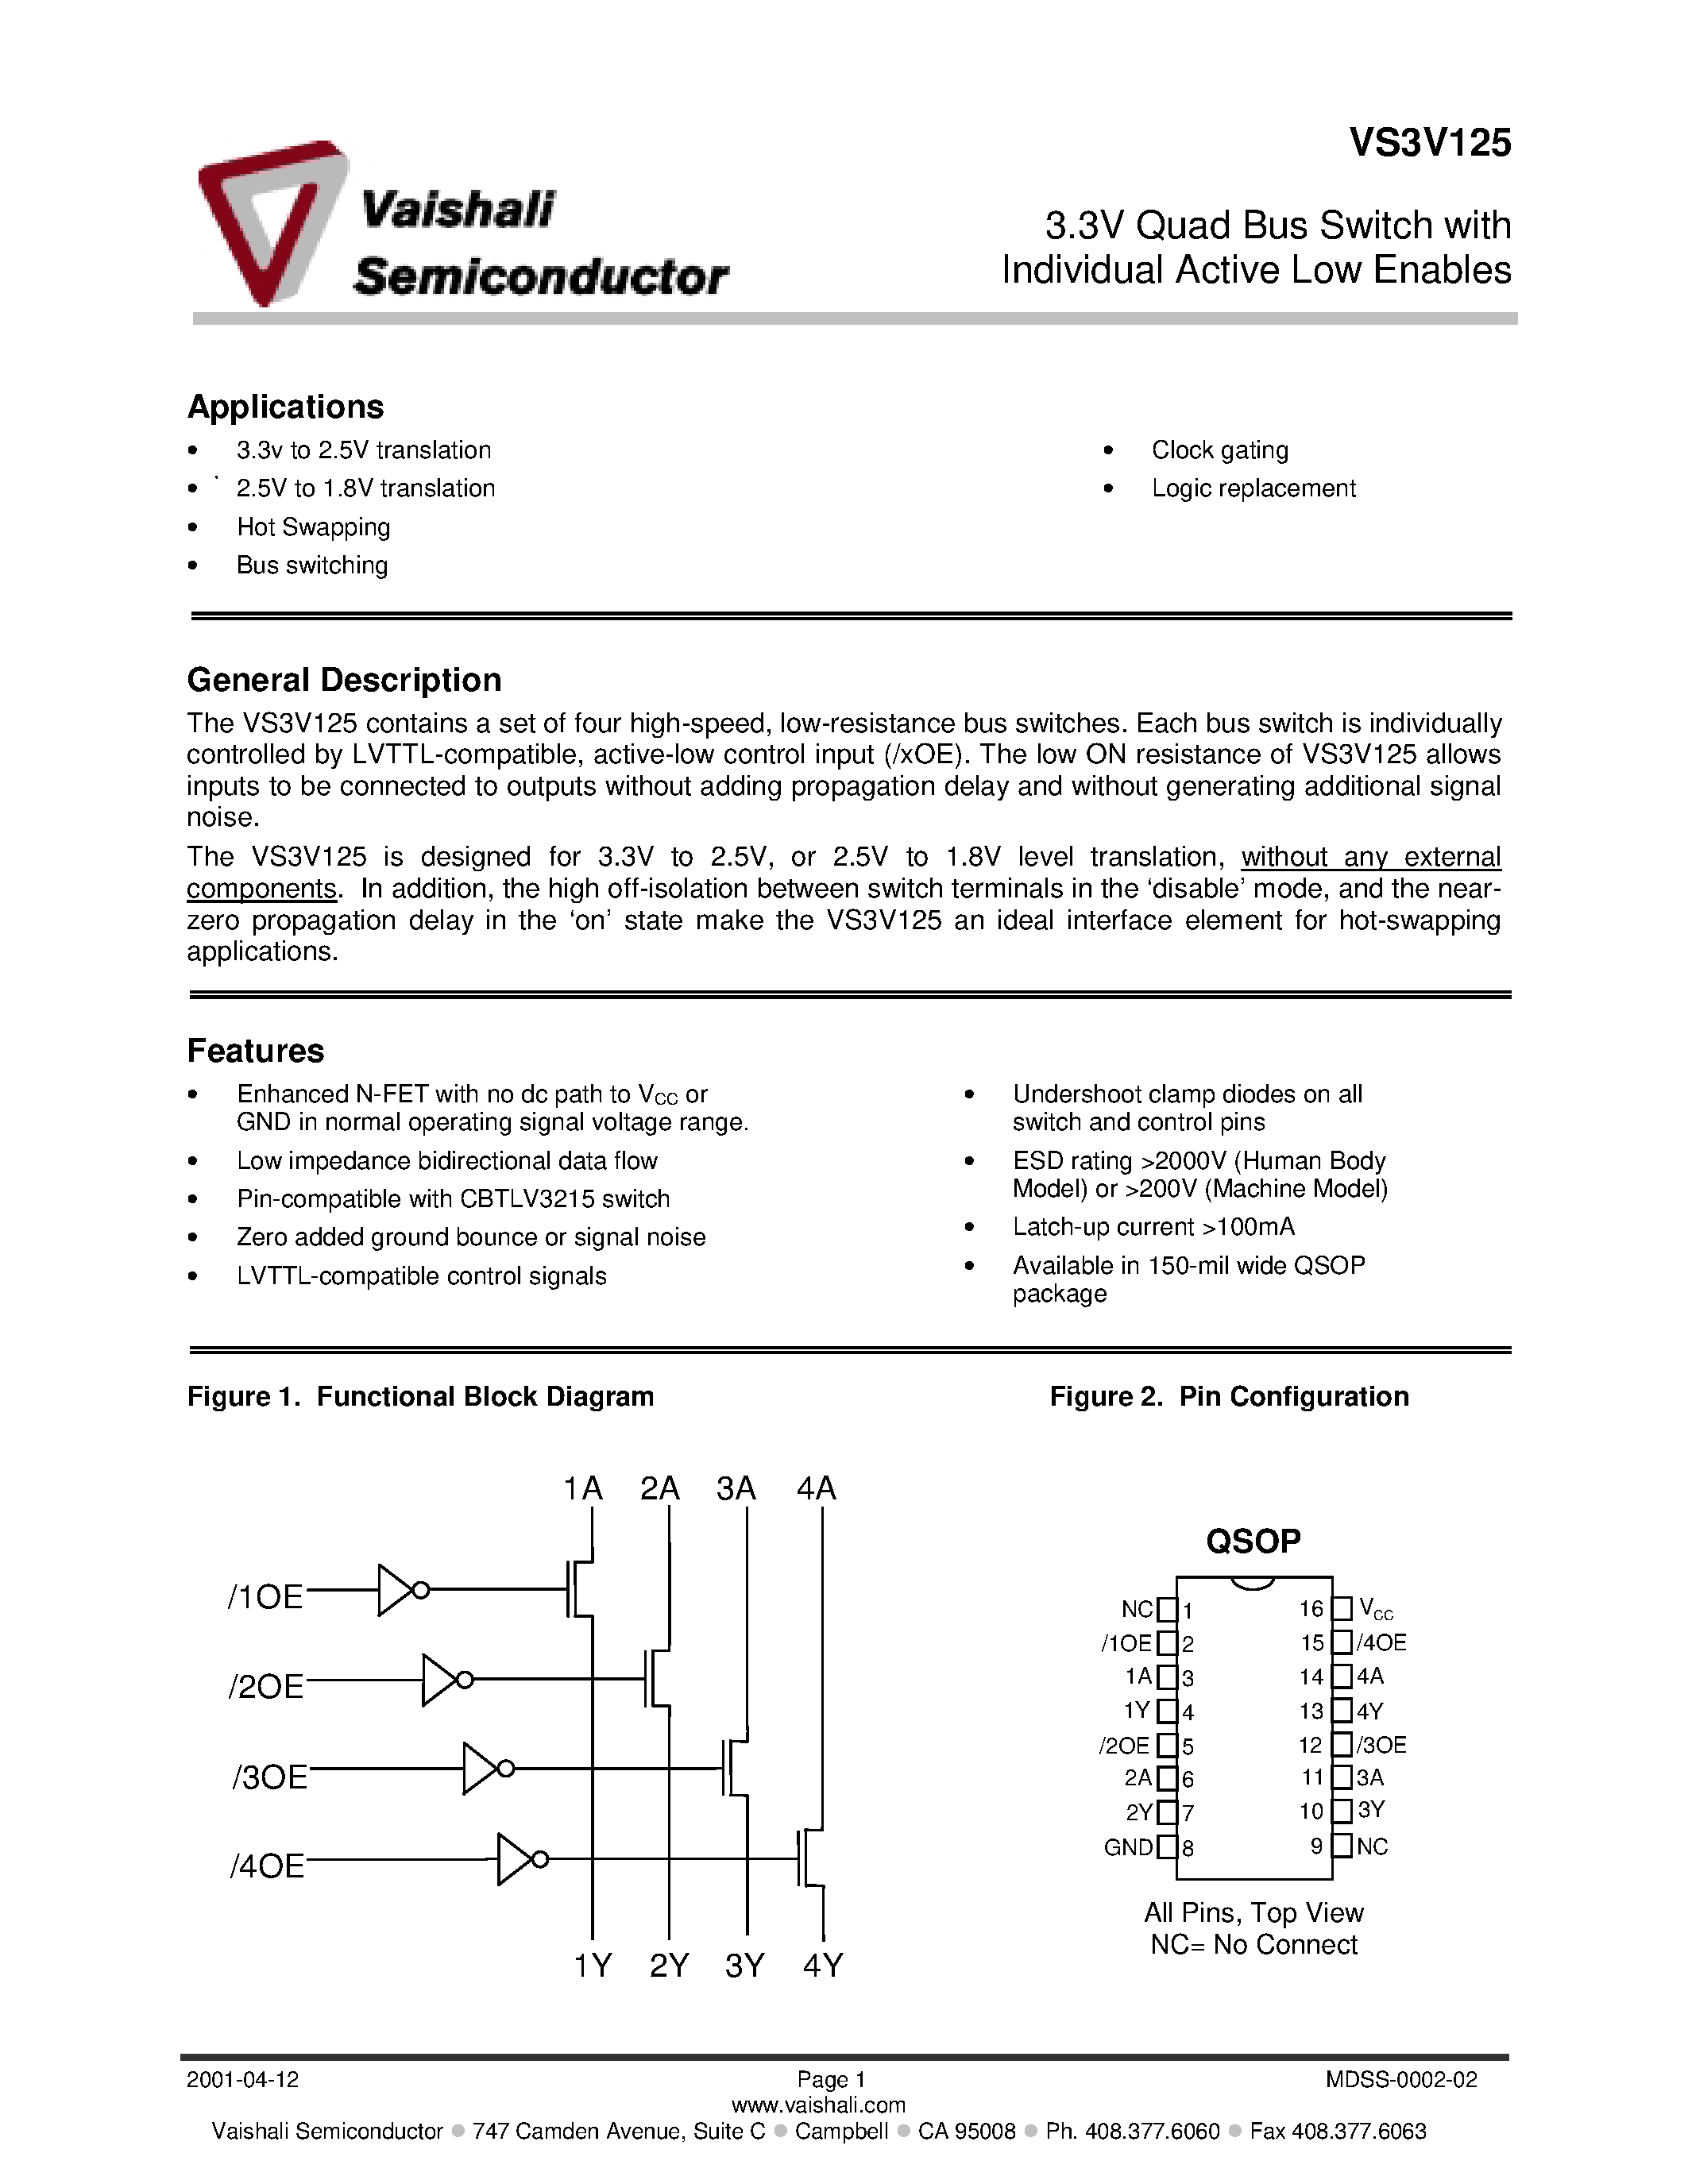 Datasheet VS3V125 - 3.3V Quad Bus Switch with Individual Active Low Enables page 1